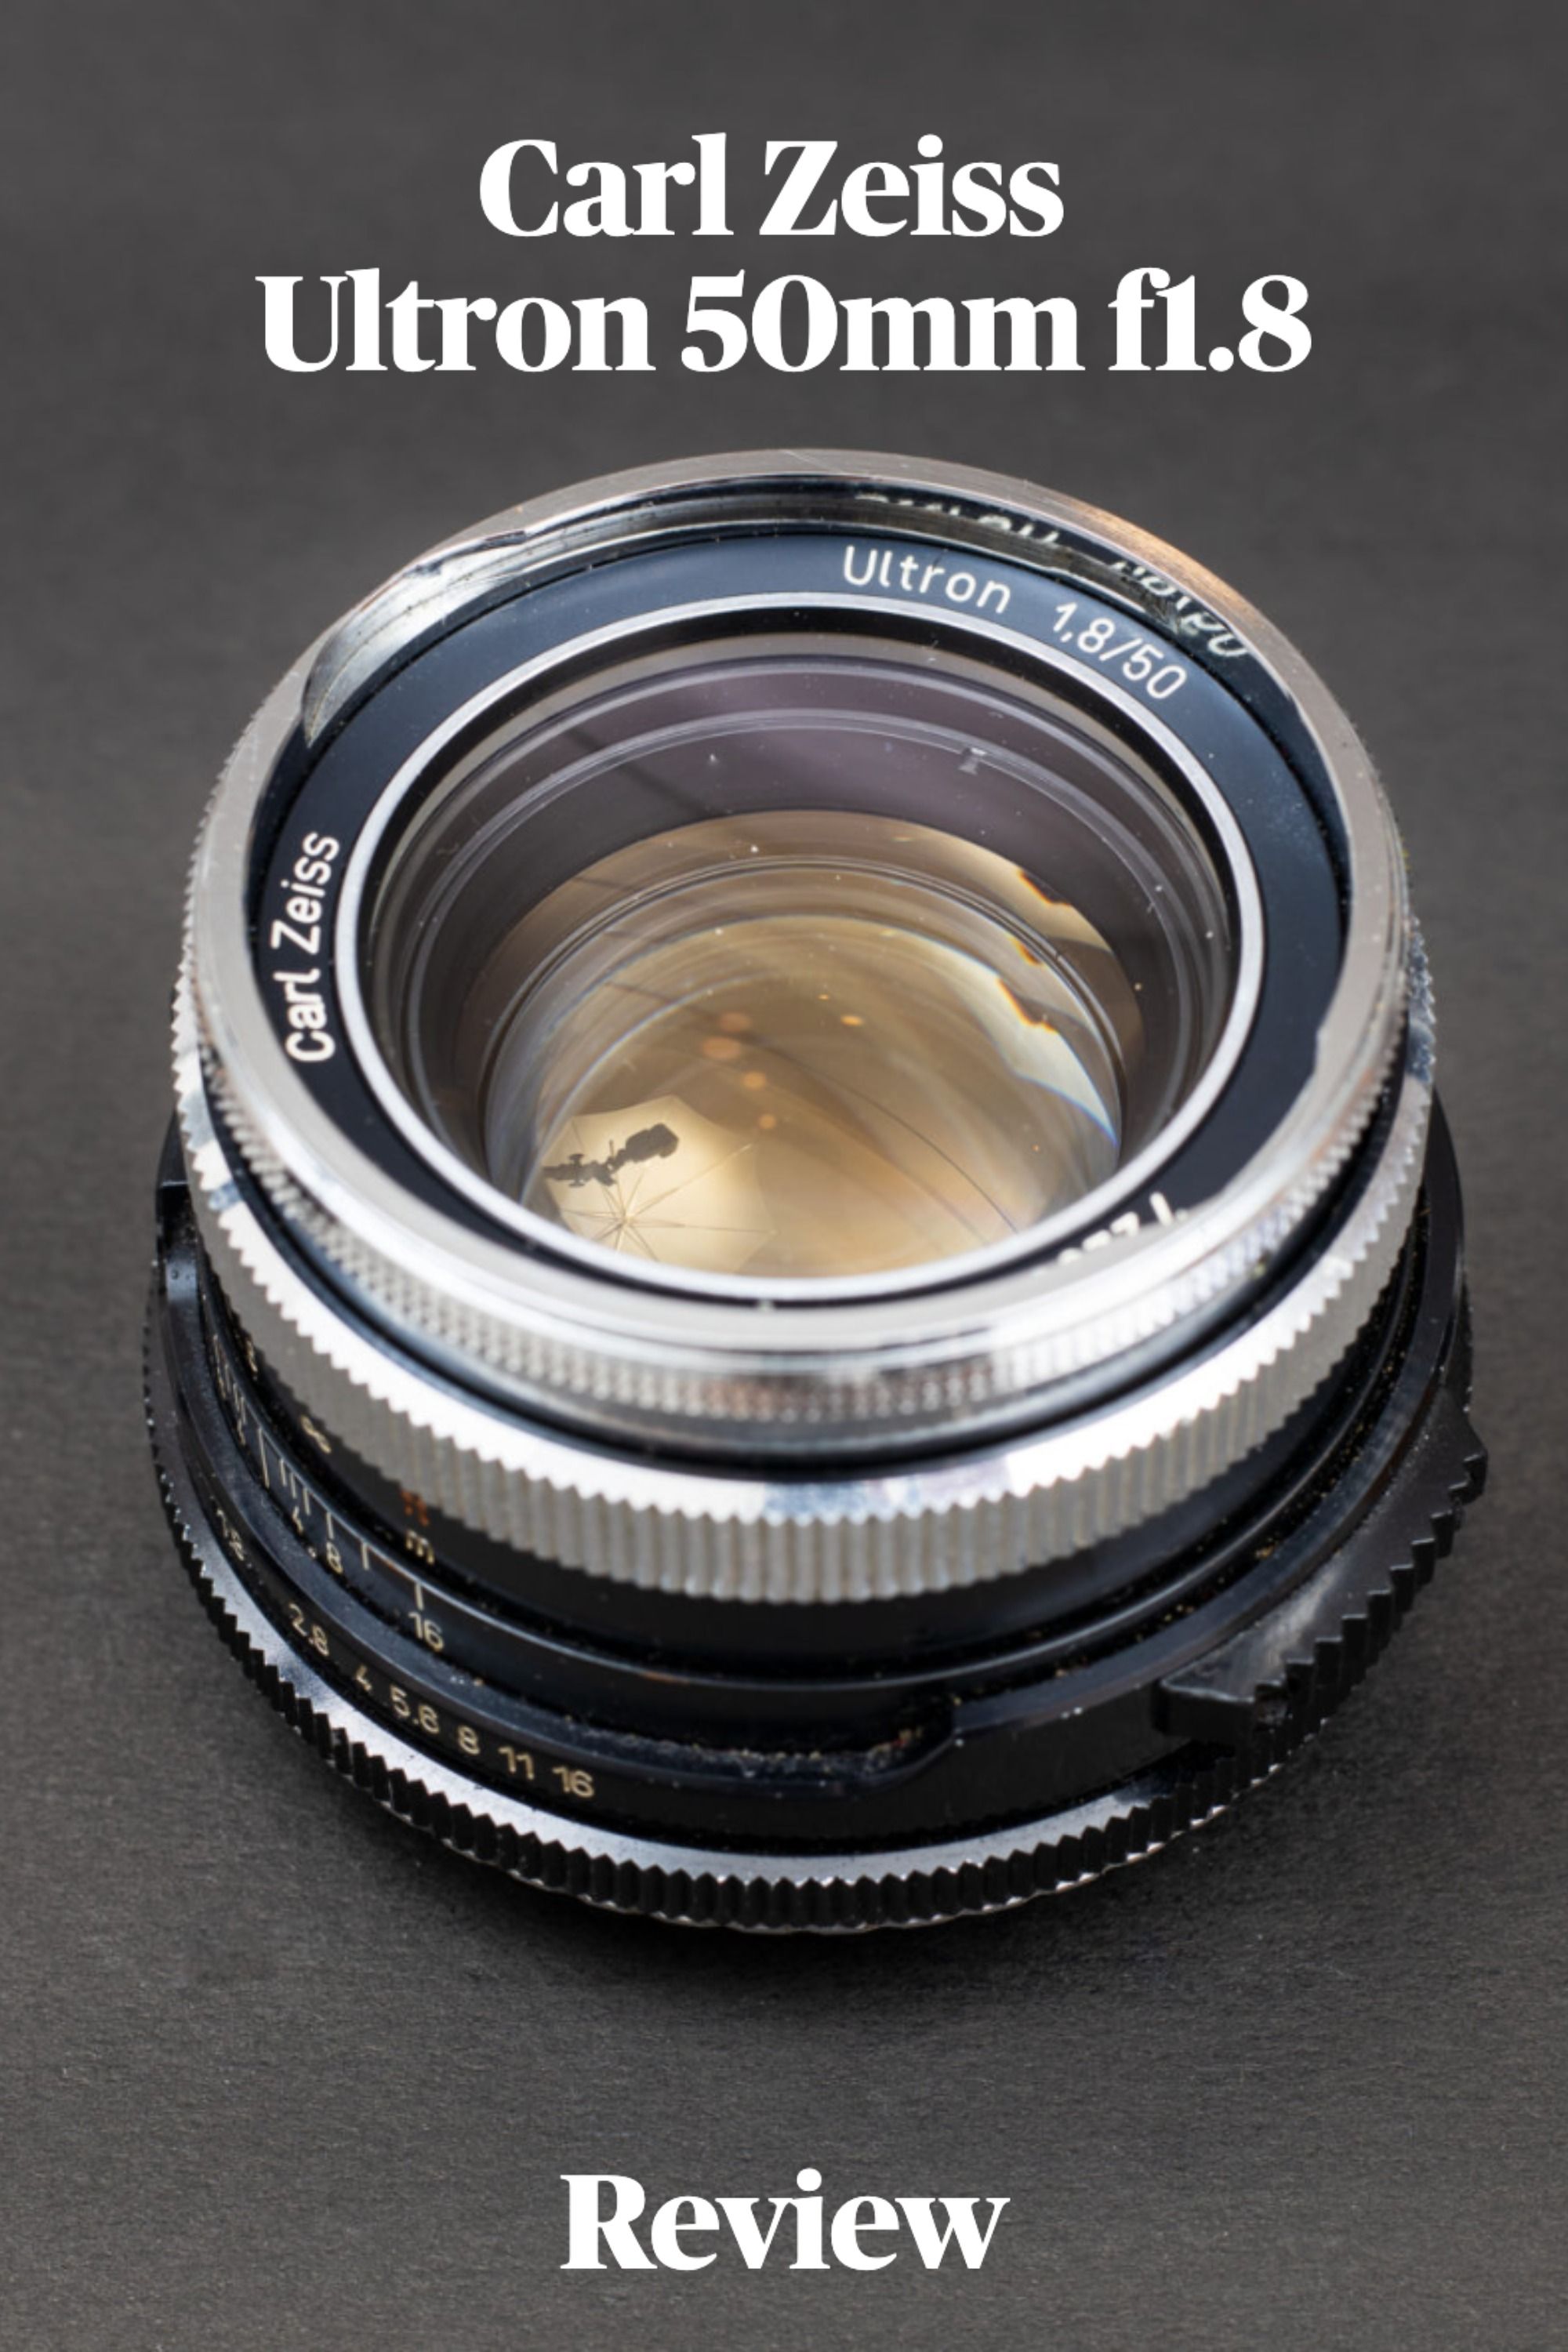 Carl Zeiss Ultron 50mm f1.8 Lens Review in 2020 Vintage